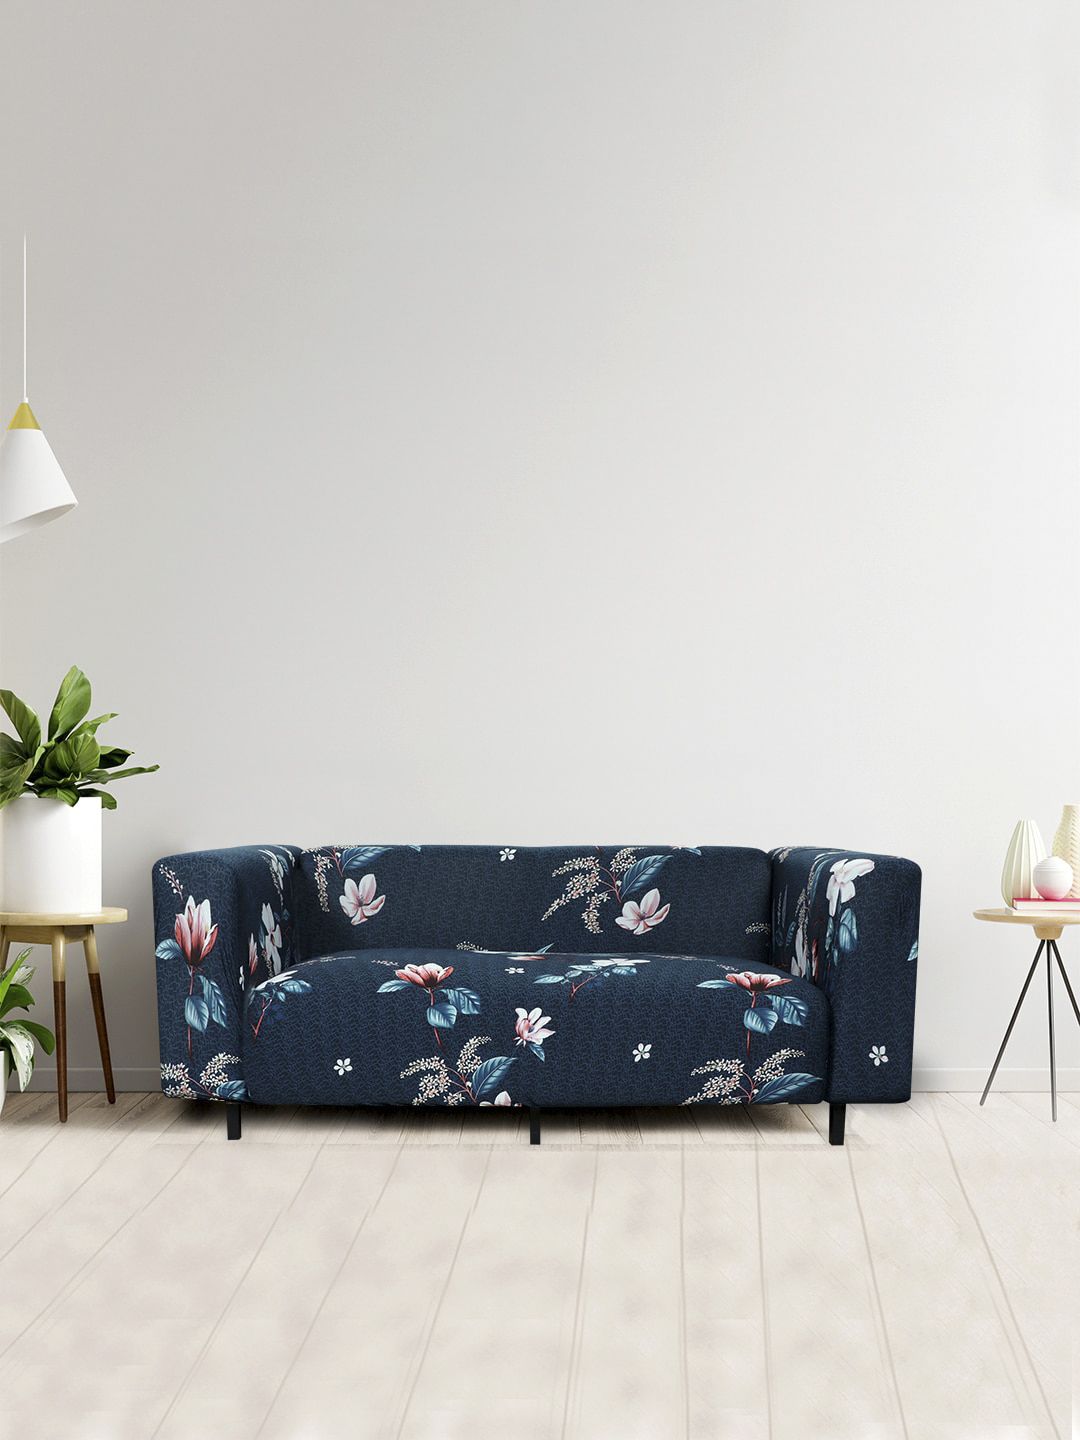 HOUSE OF QUIRK Navy Blue & White Floral Printed 2-Seater Sofa Slipcover Price in India